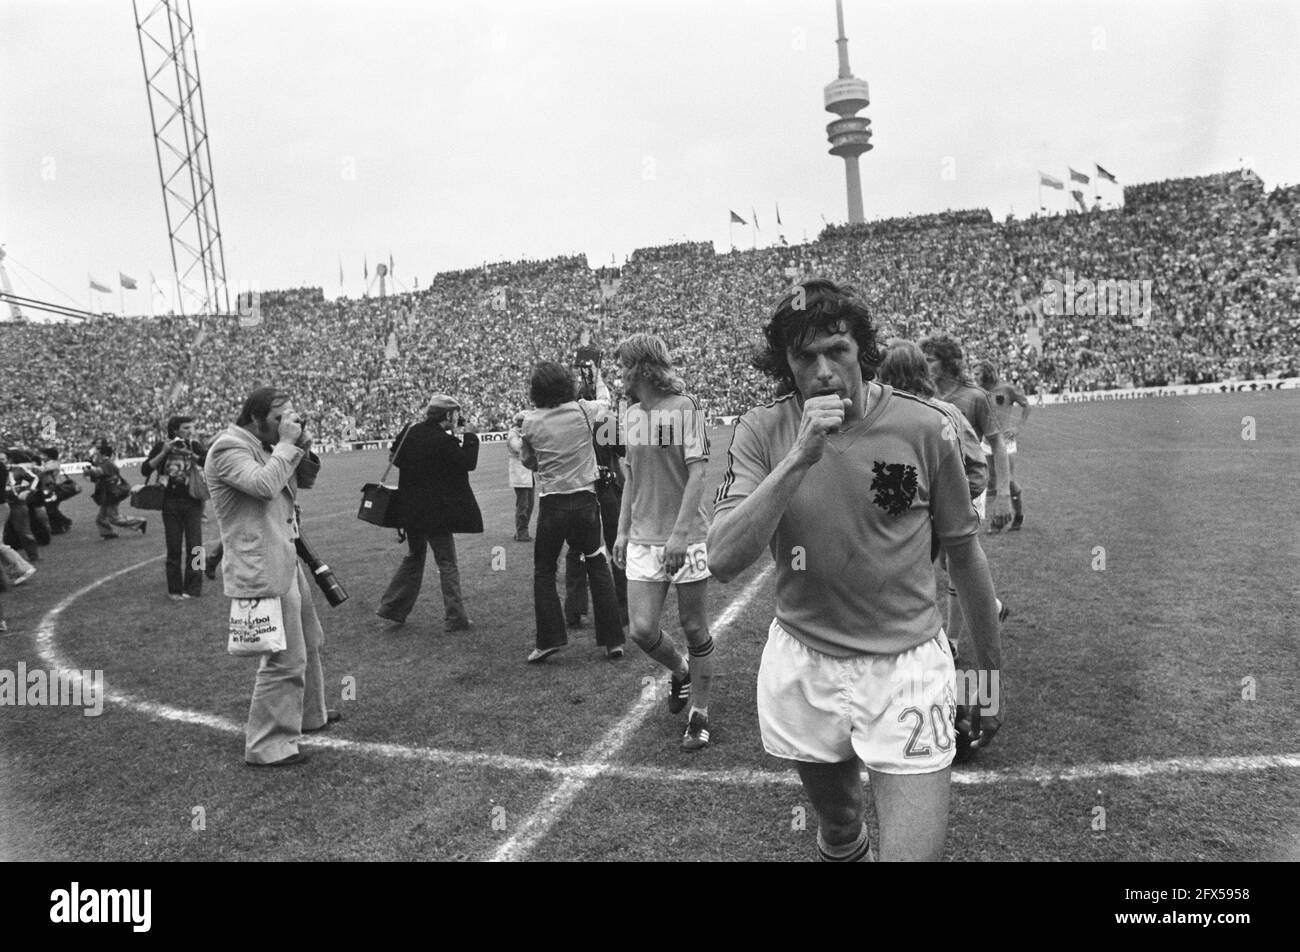 World Cup final 1974 in Munich, West Germany v Netherlands 2-1; Dutch players leave the field, July 7, 1974, finals, sports, soccer, world championships, The Netherlands, 20th century press agency photo, news to remember, documentary, historic photography 1945-1990, visual stories, human history of the Twentieth Century, capturing moments in time Stock Photo